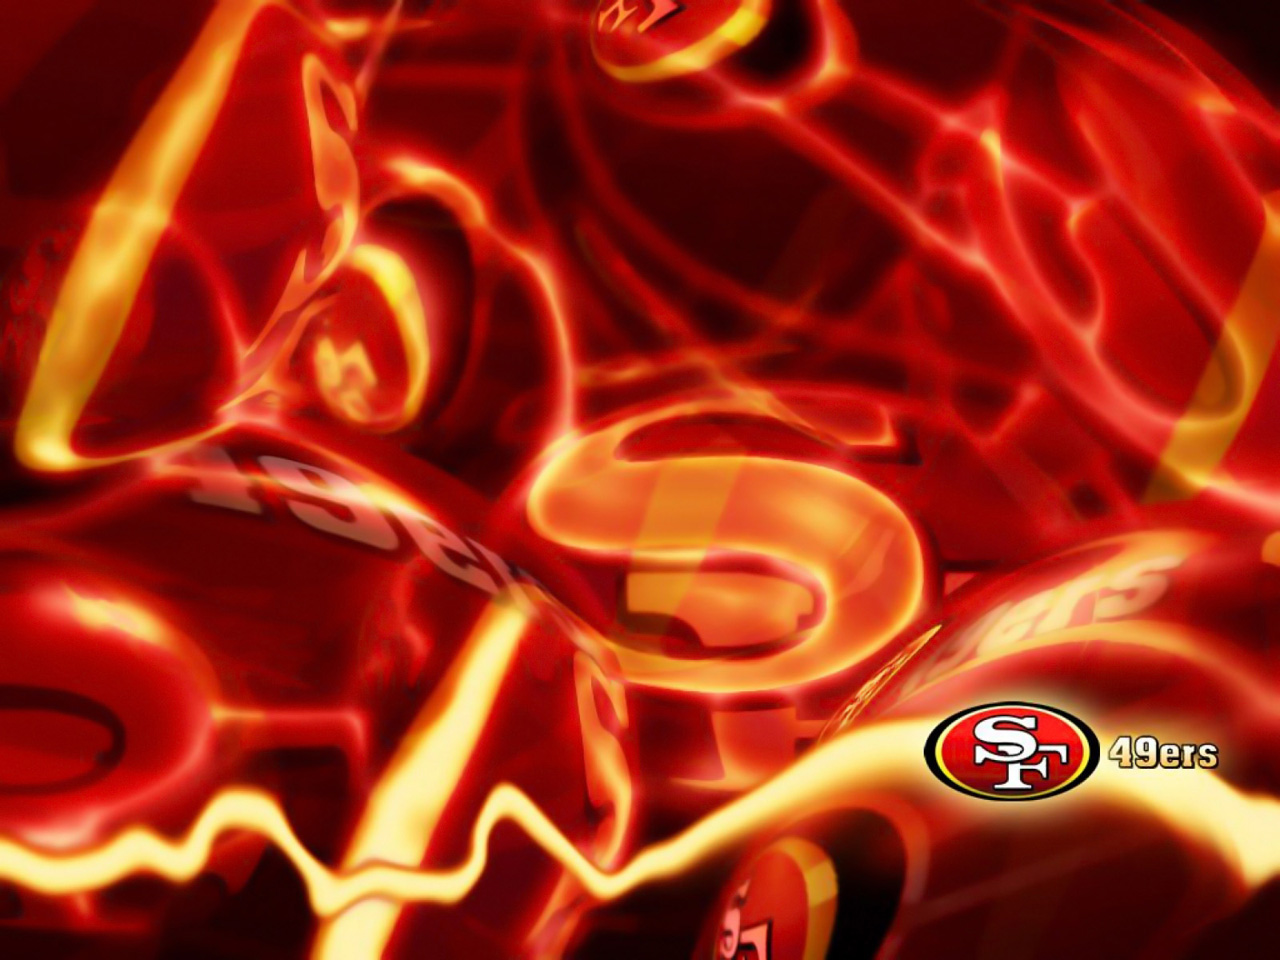  49ers or even videos related to San Francisco 49ers wallpaper